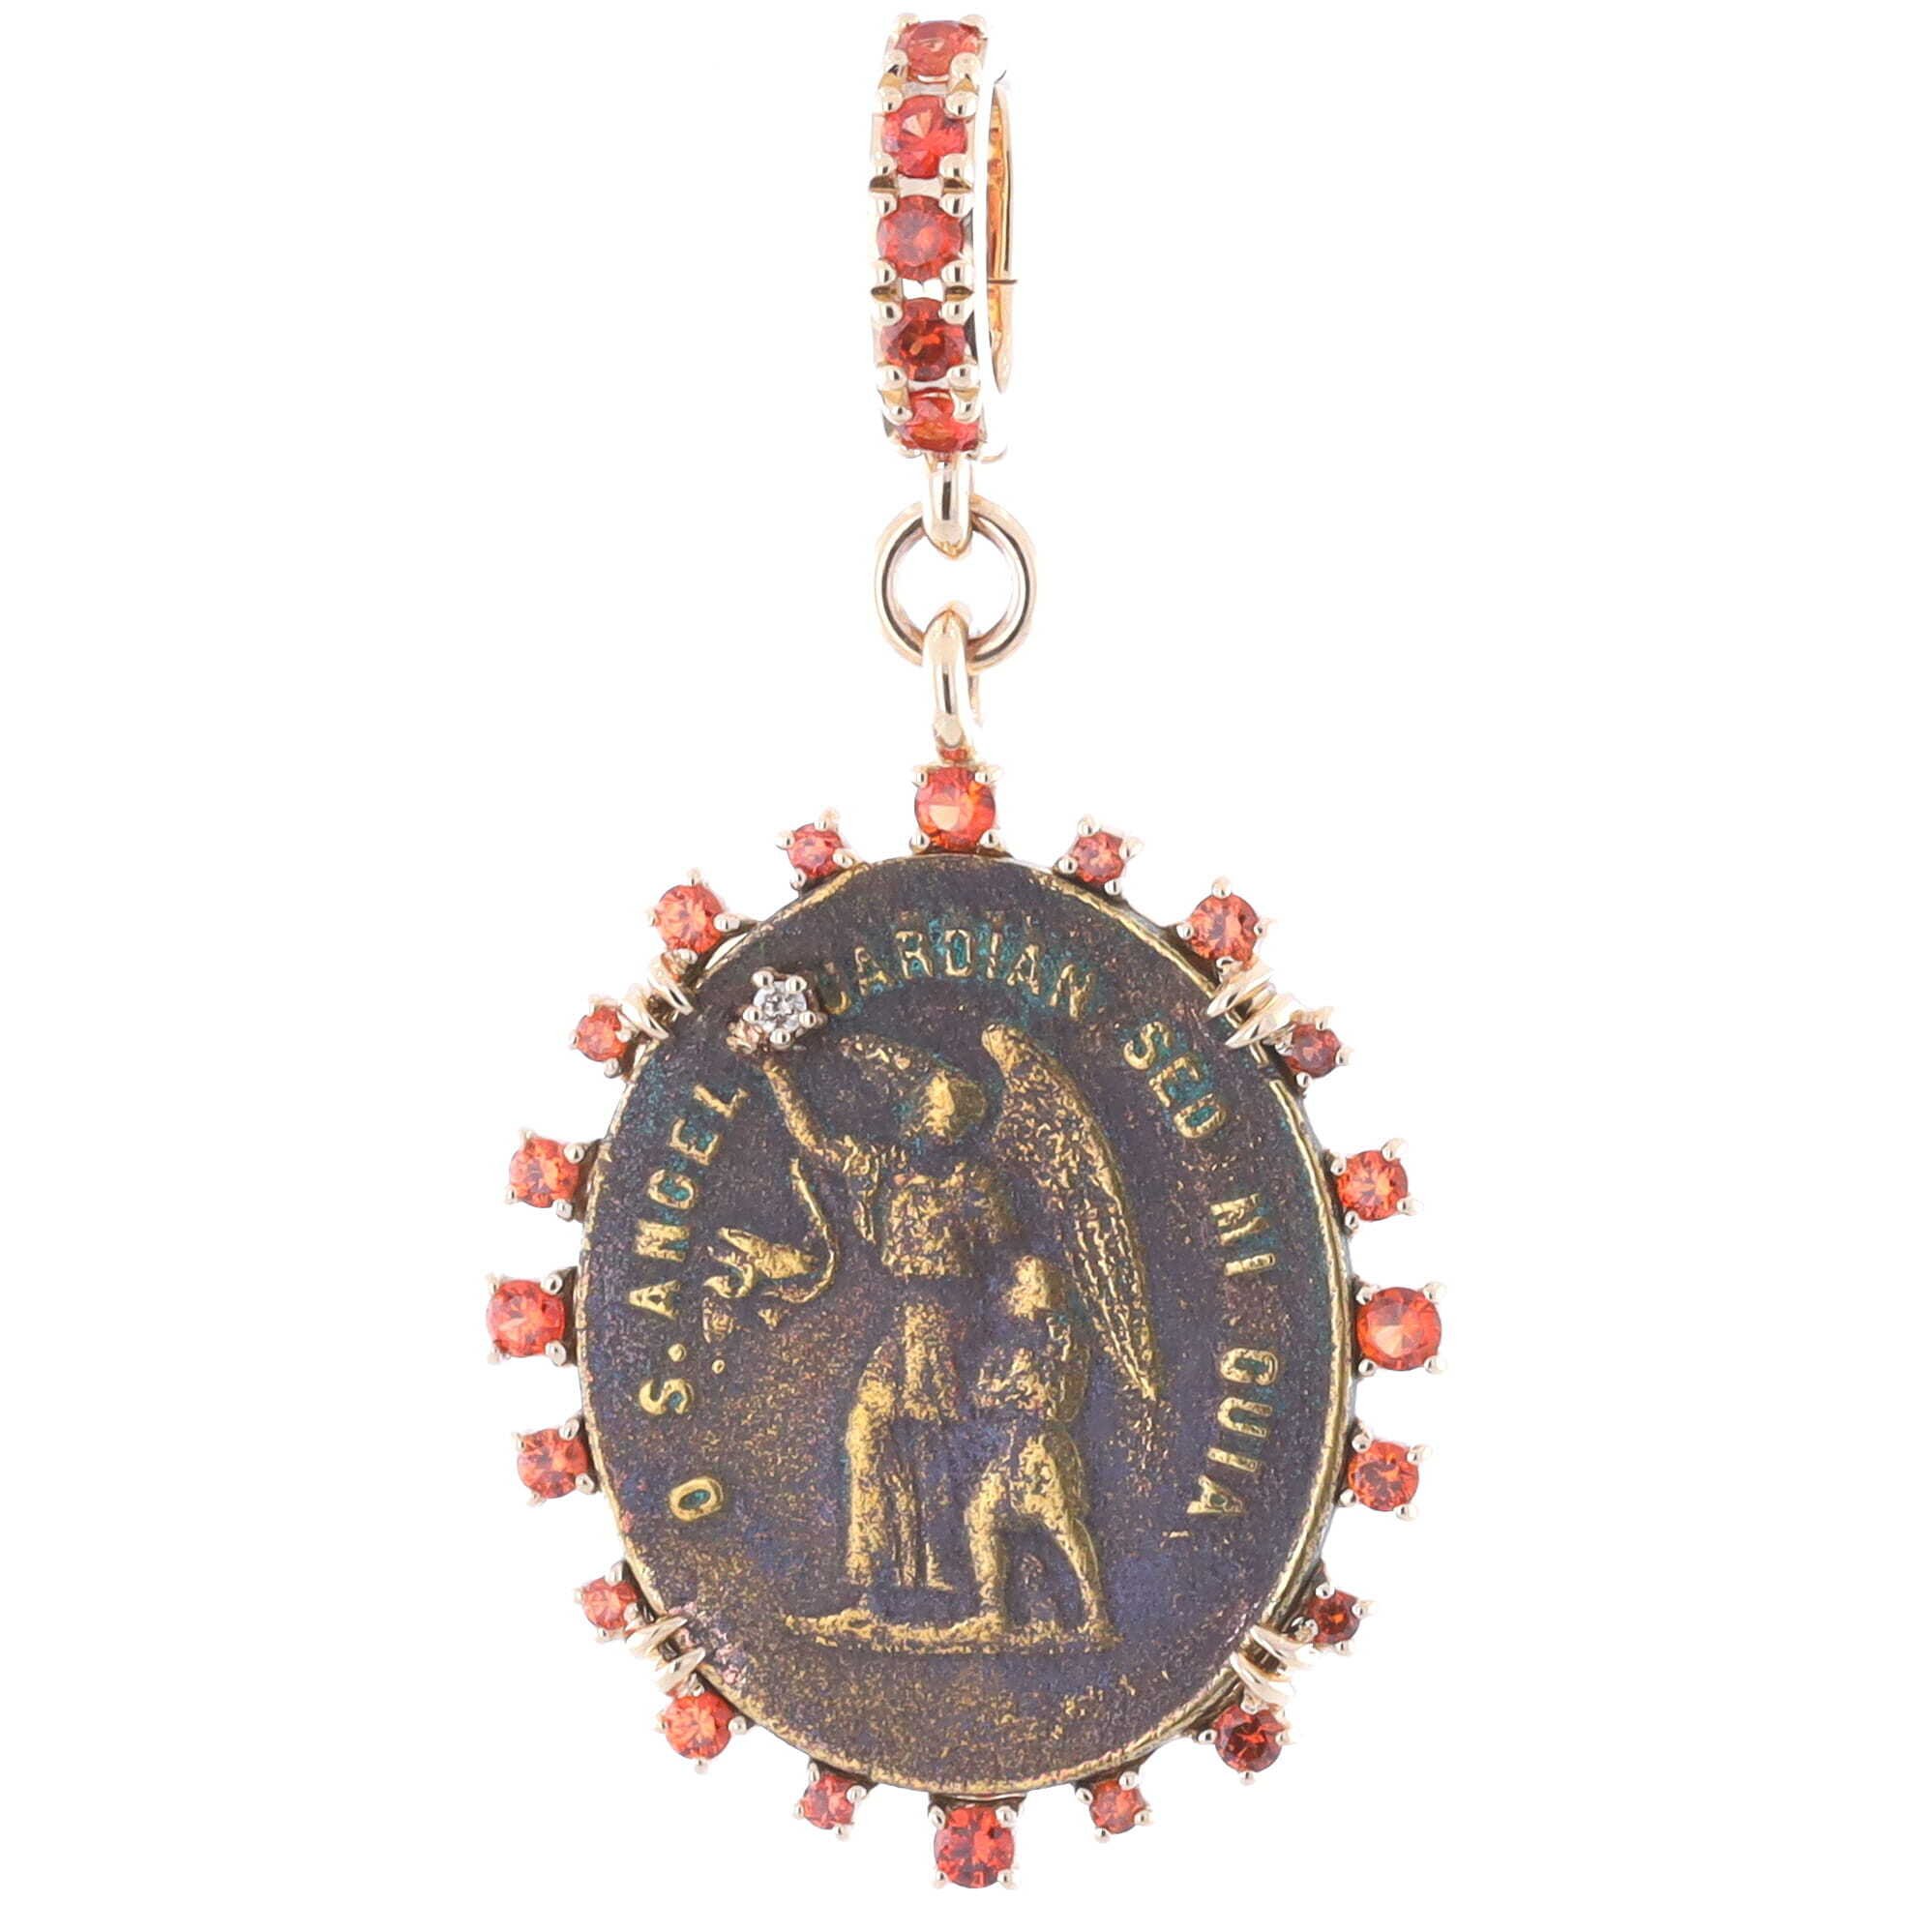 Antique Bronze Spanish Guardian Angel Pendant Medal with Orange Sapphires Set in 14k Yellow Gold